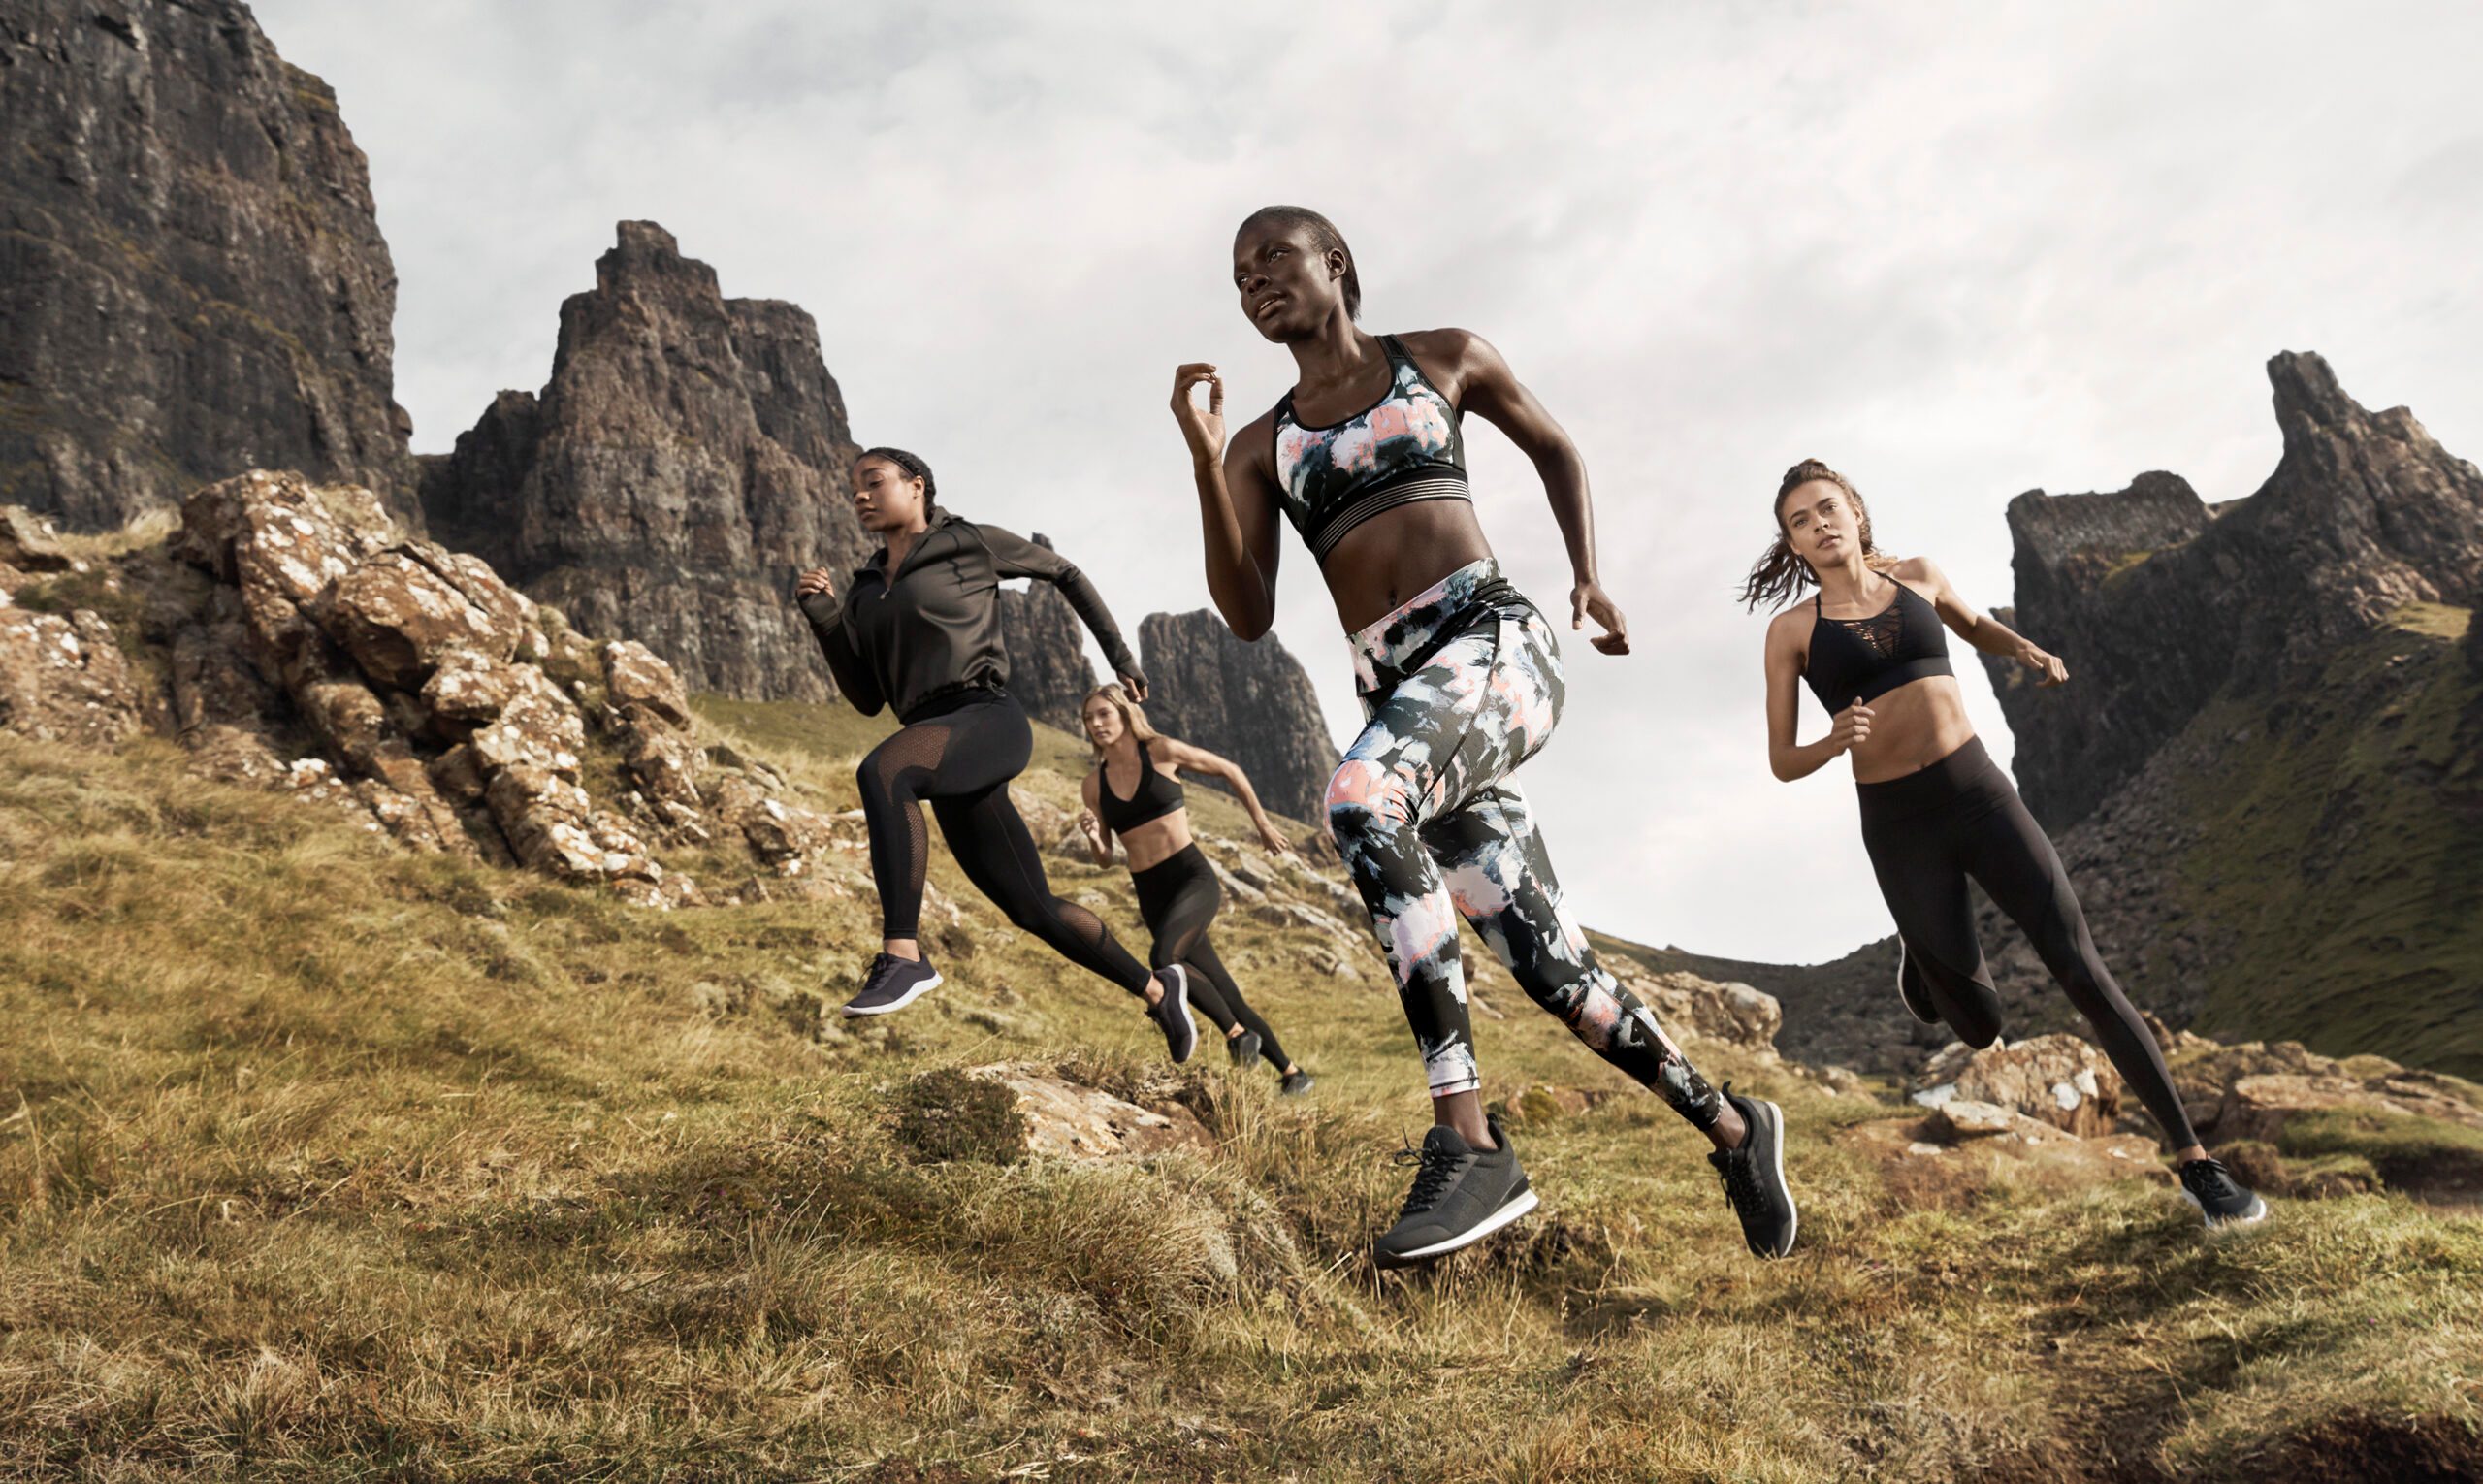 H&M's Launching a New Fitness Line, H&M Sport